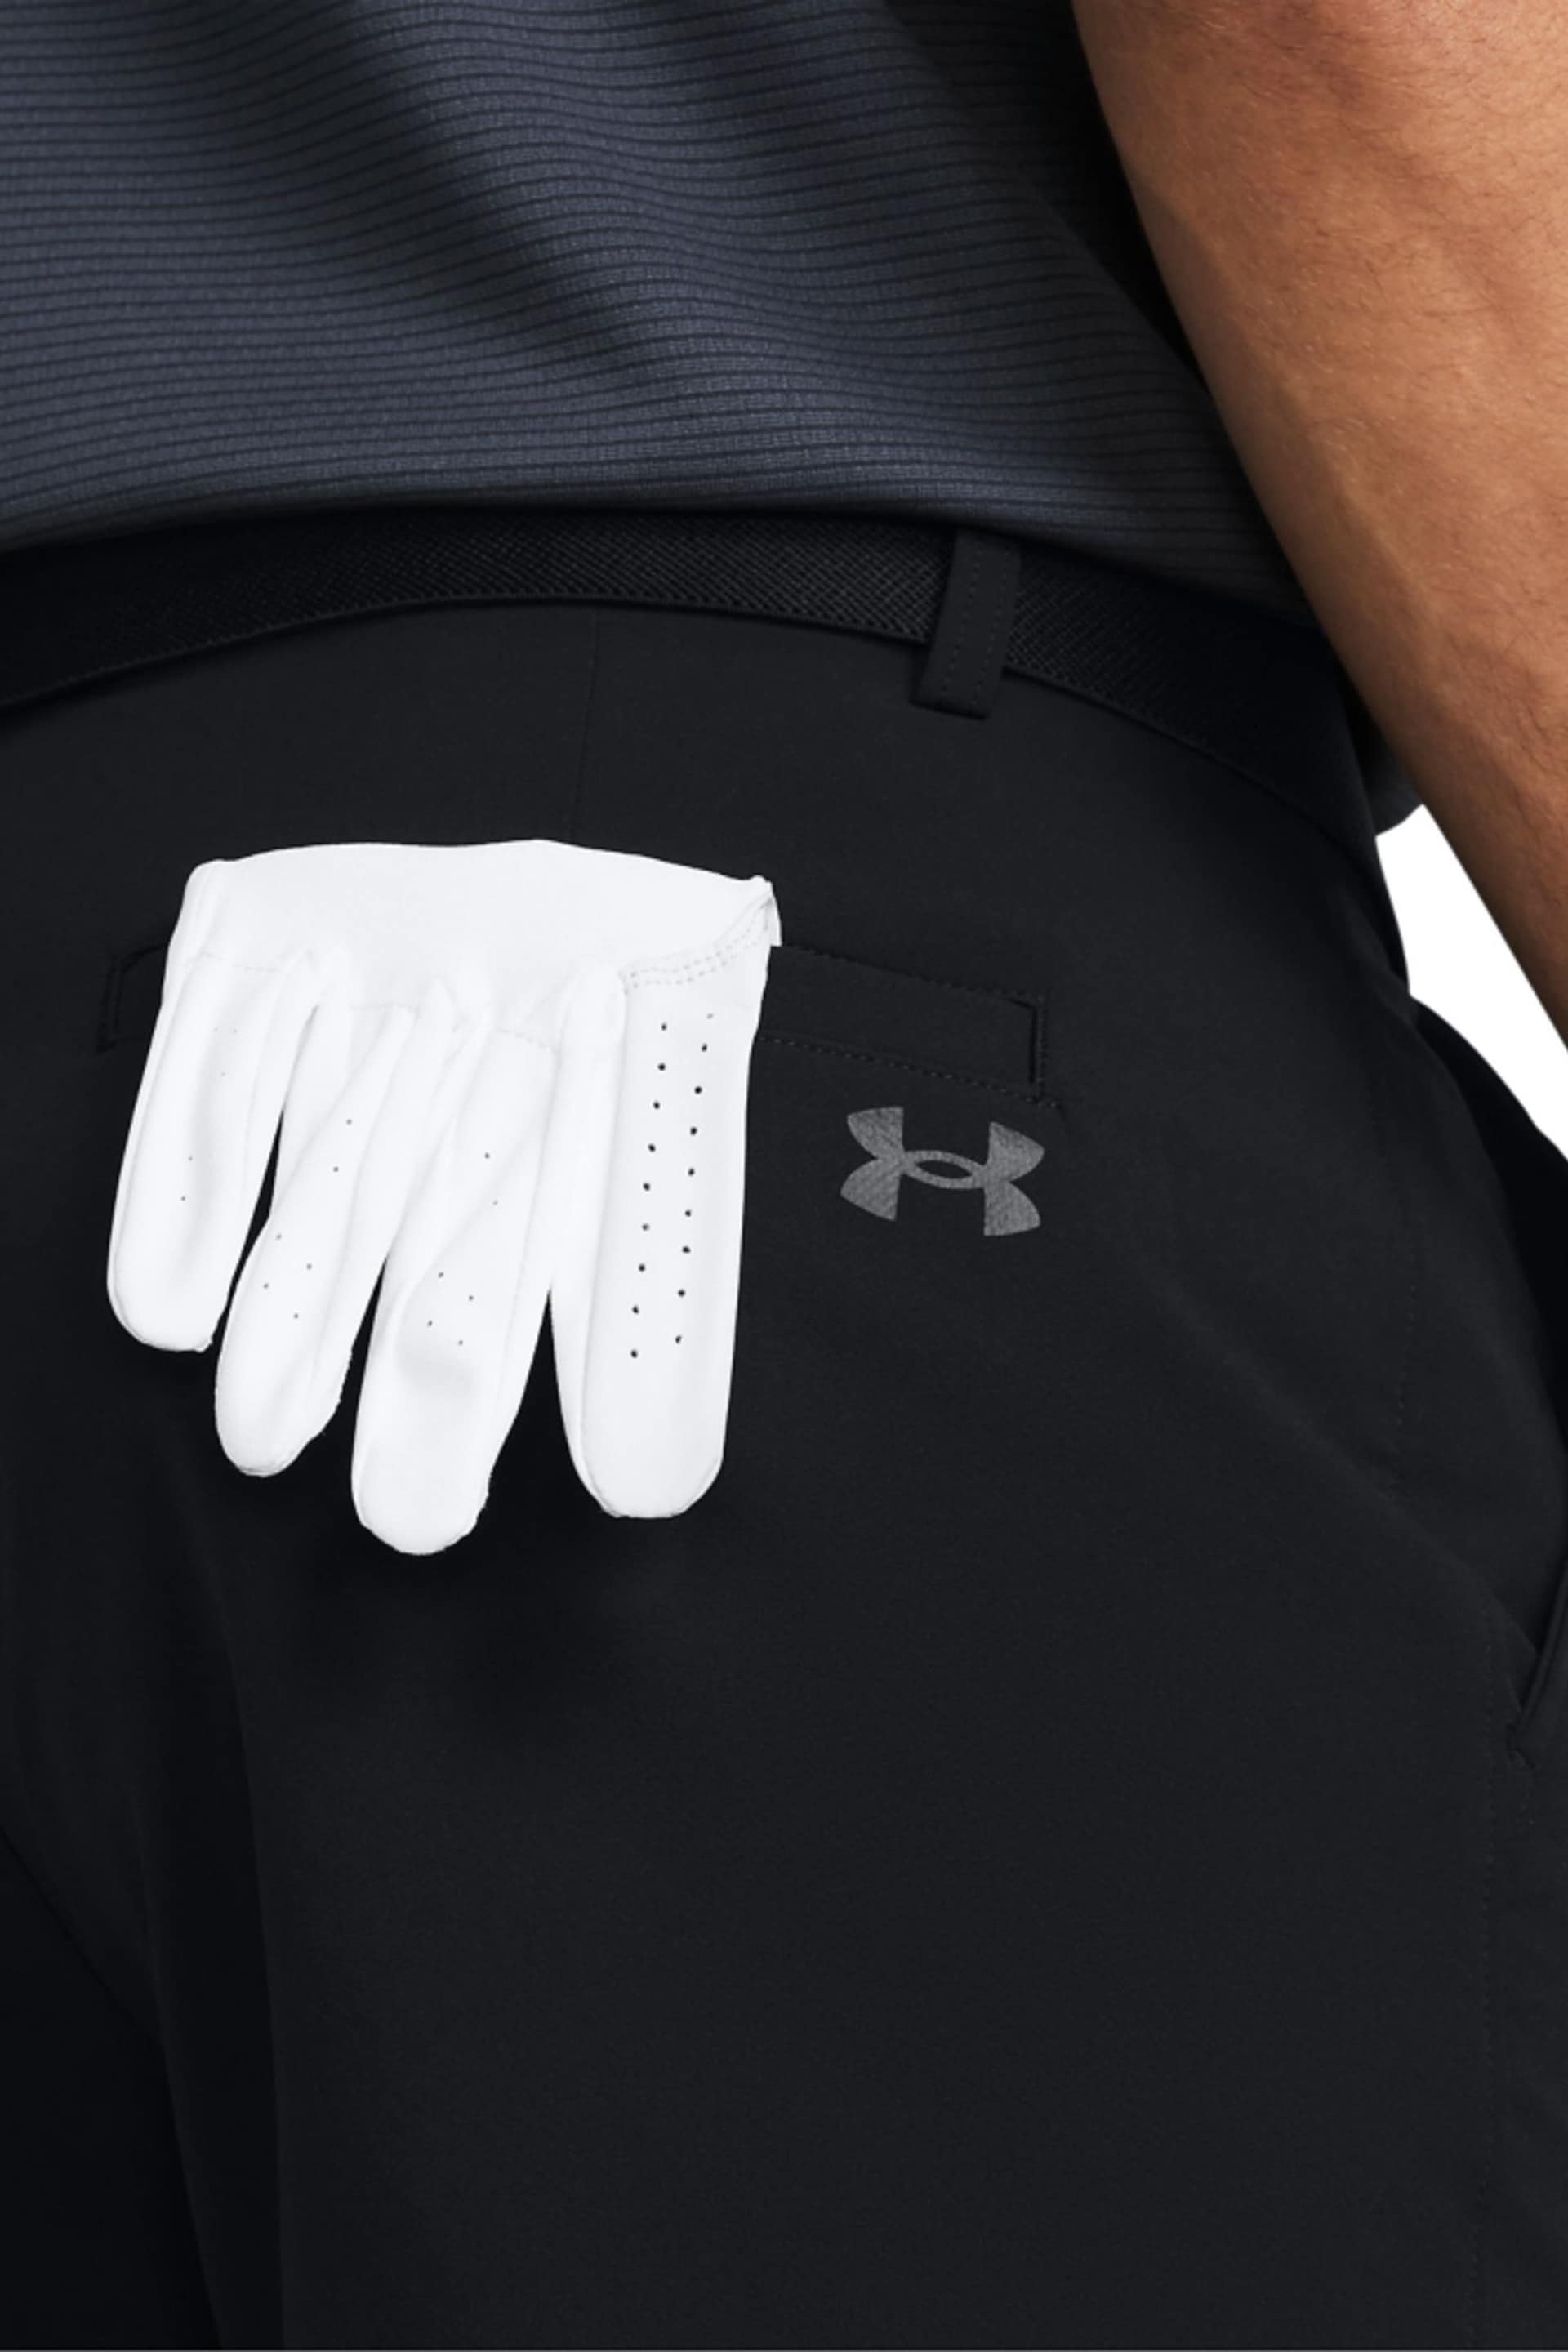 Under Armour Black Tech Taper Shorts - Image 4 of 6